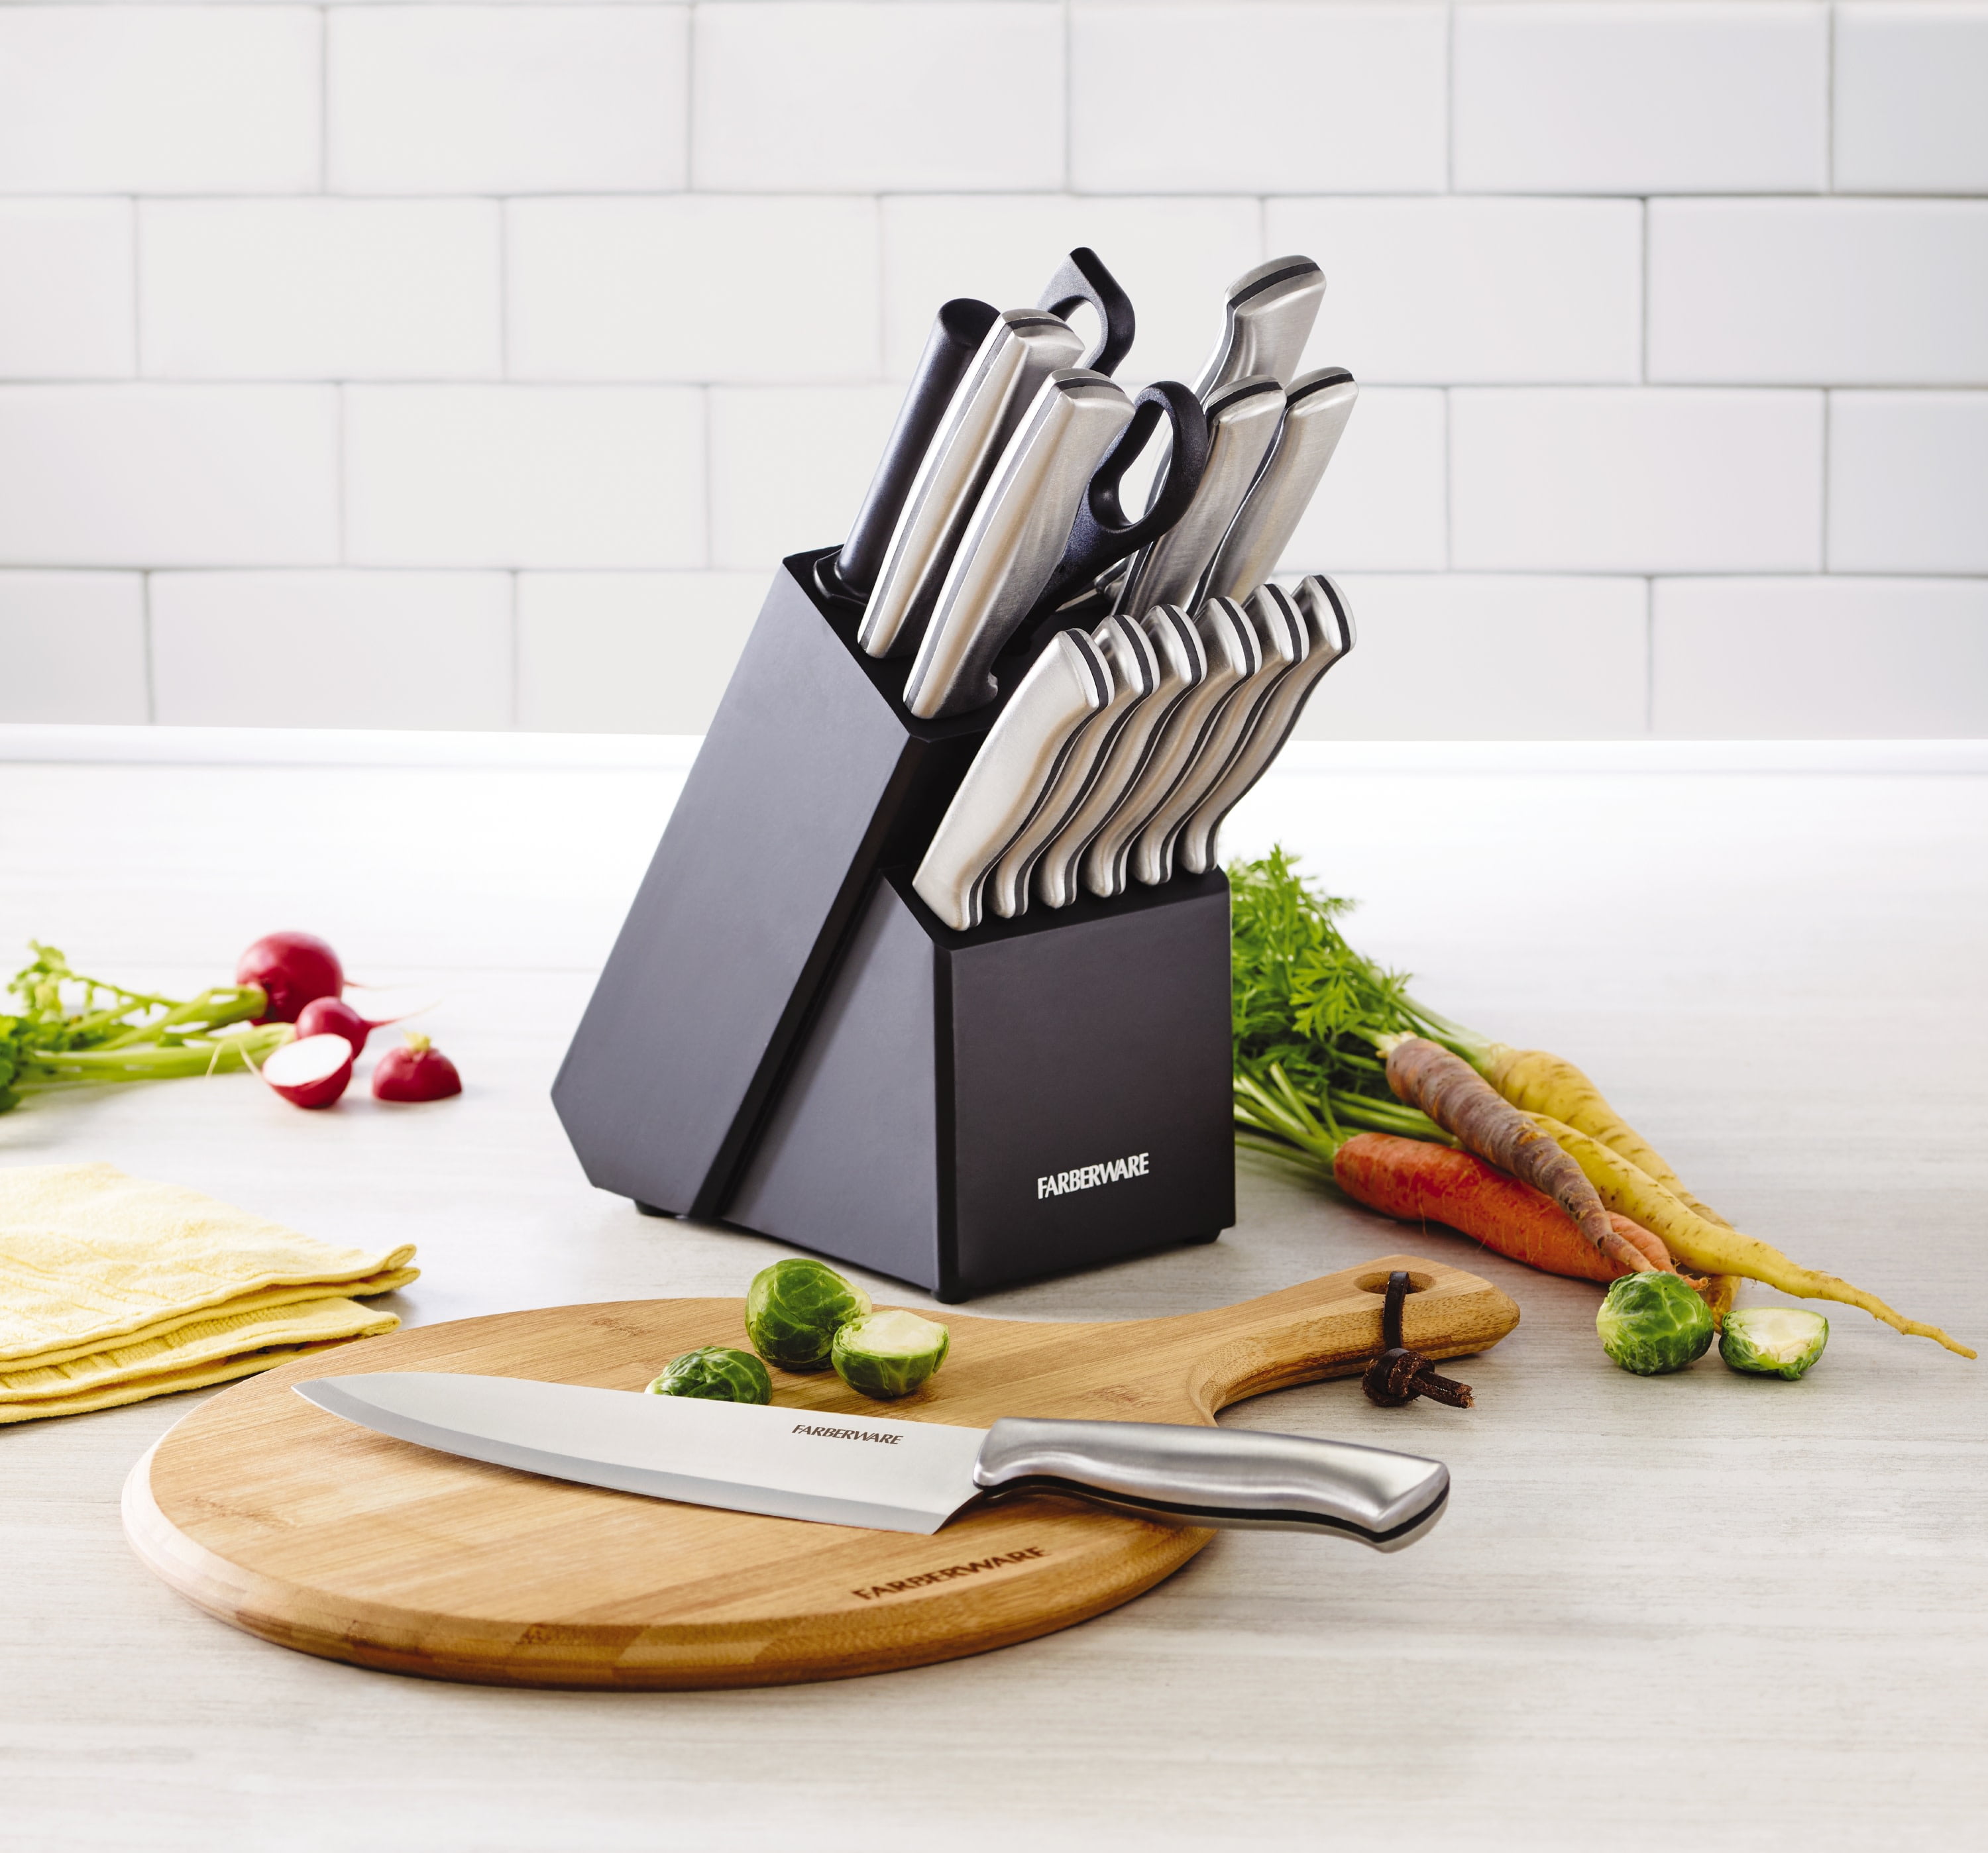  Cook N Home 12-Piece Stainless Steel Cookware Set, Silver &  Farberware Stamped 15-Piece High-Carbon Stainless Steel Knife Block Set,  Steak Knives, Black: Home & Kitchen